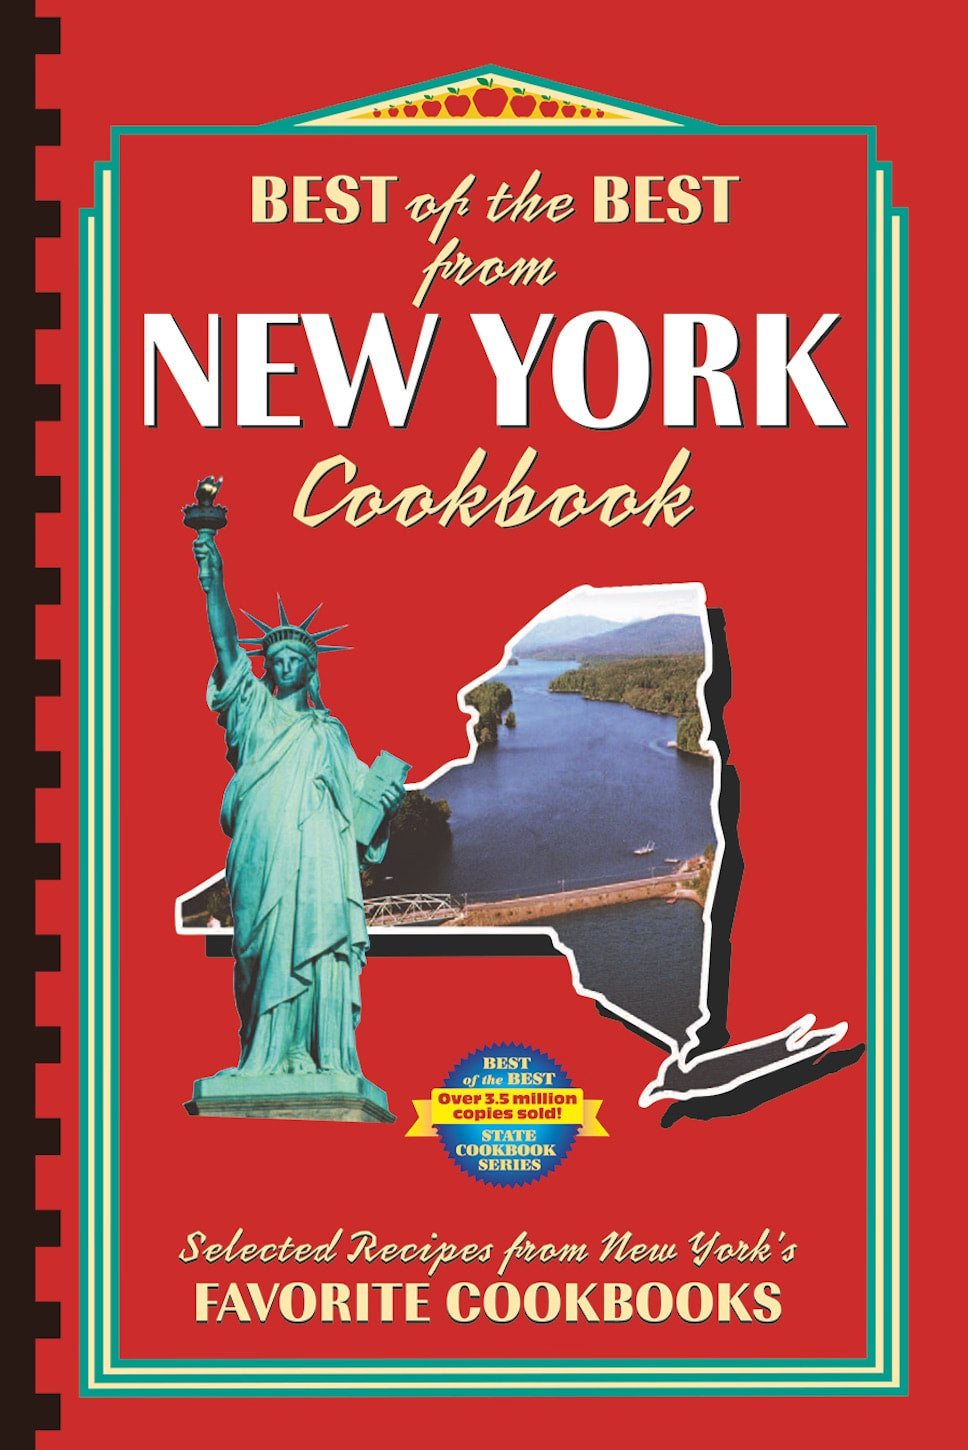 Best of the Best from New York Cookbook: Selected Recipes from New York's Favorite Cookbooks